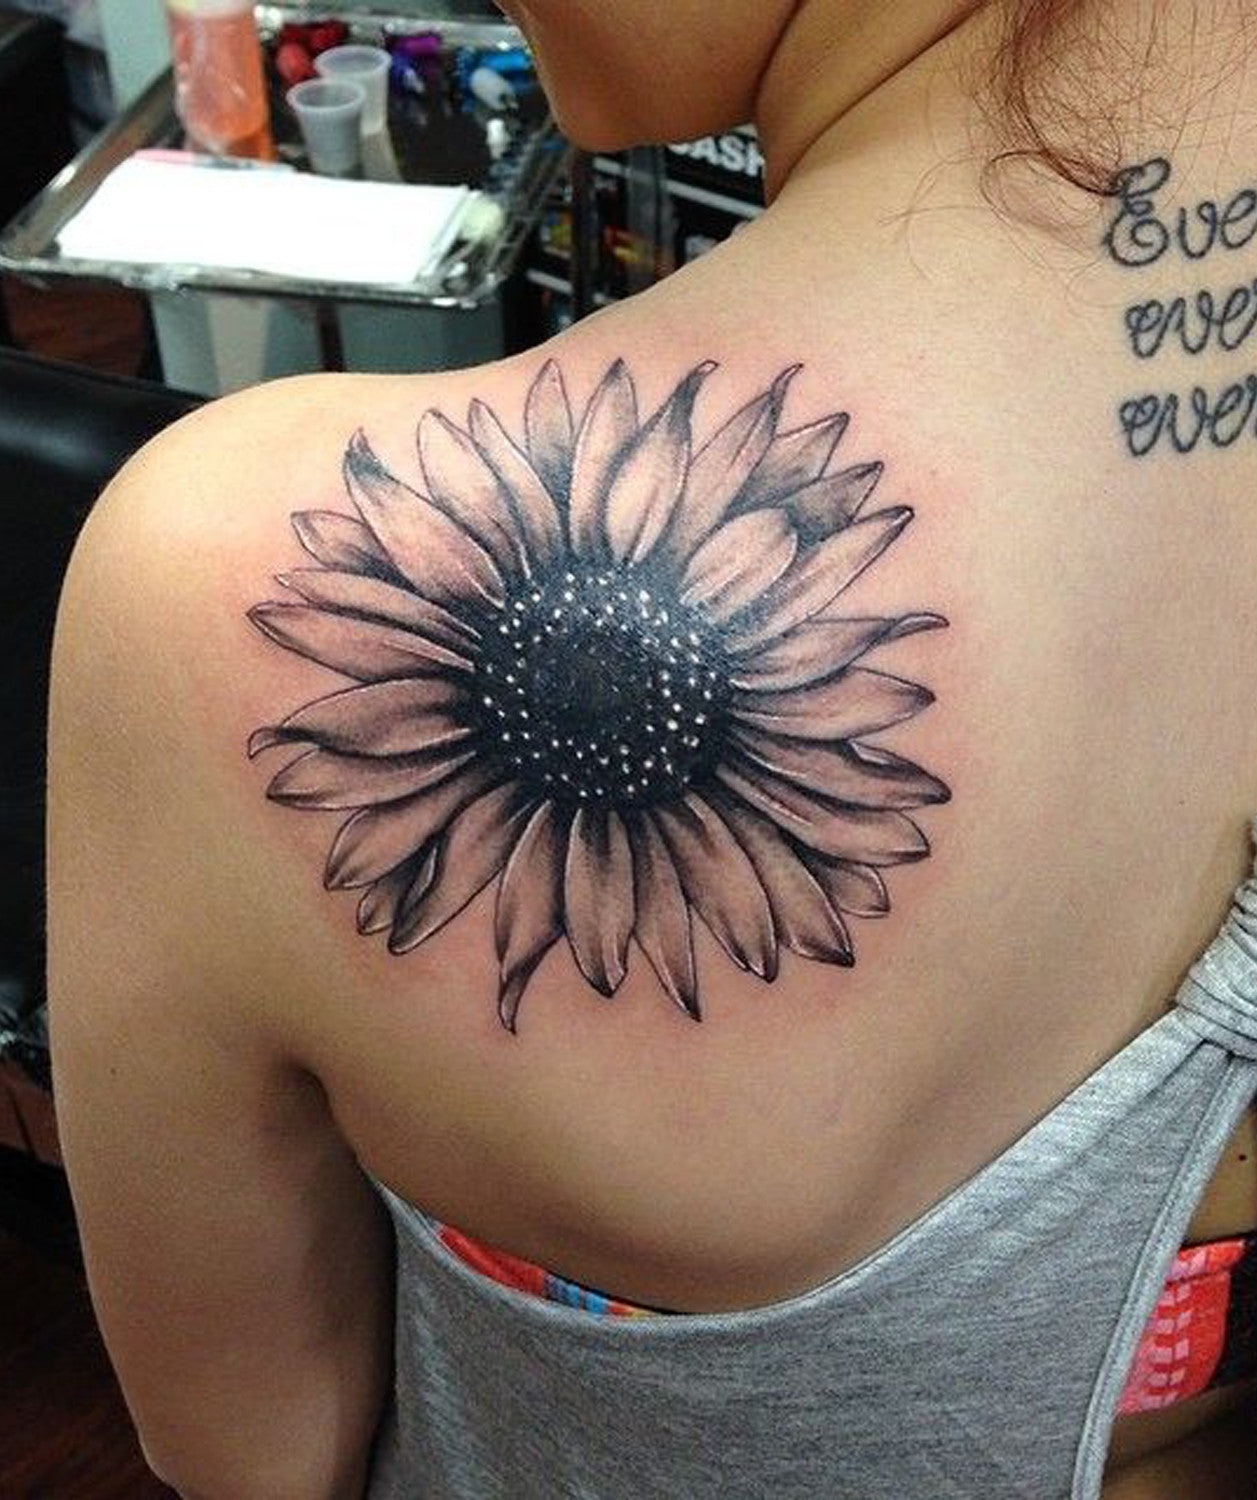 Back of Shoulder Black and White Floral Sunflower Tattoo Ideas for Women at MyBodiArt.com 